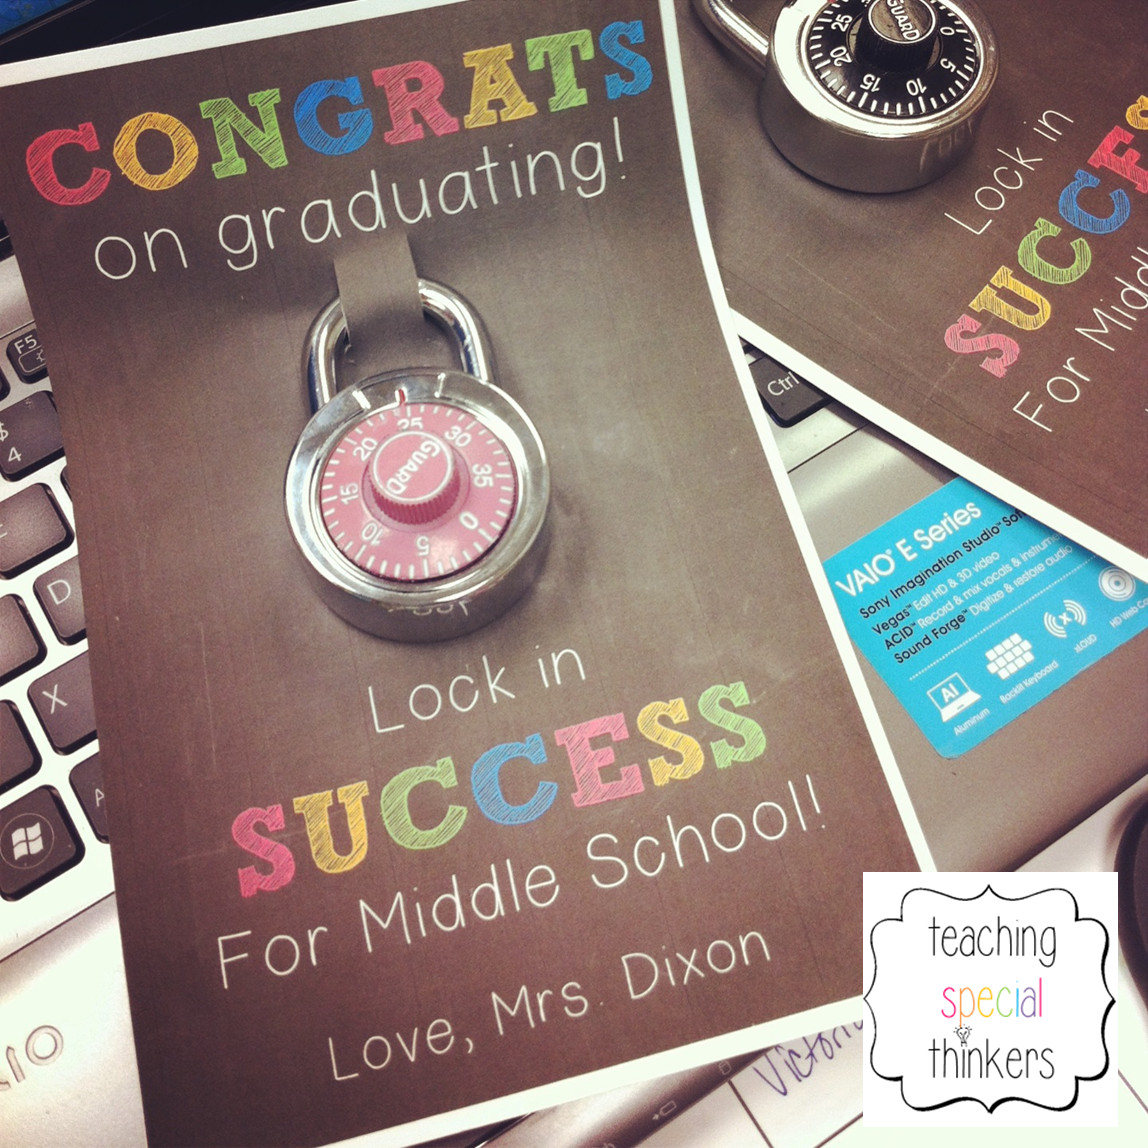 Grade School Graduation Gift Ideas
 Lock in Success – Student Gift for soon to be Middle